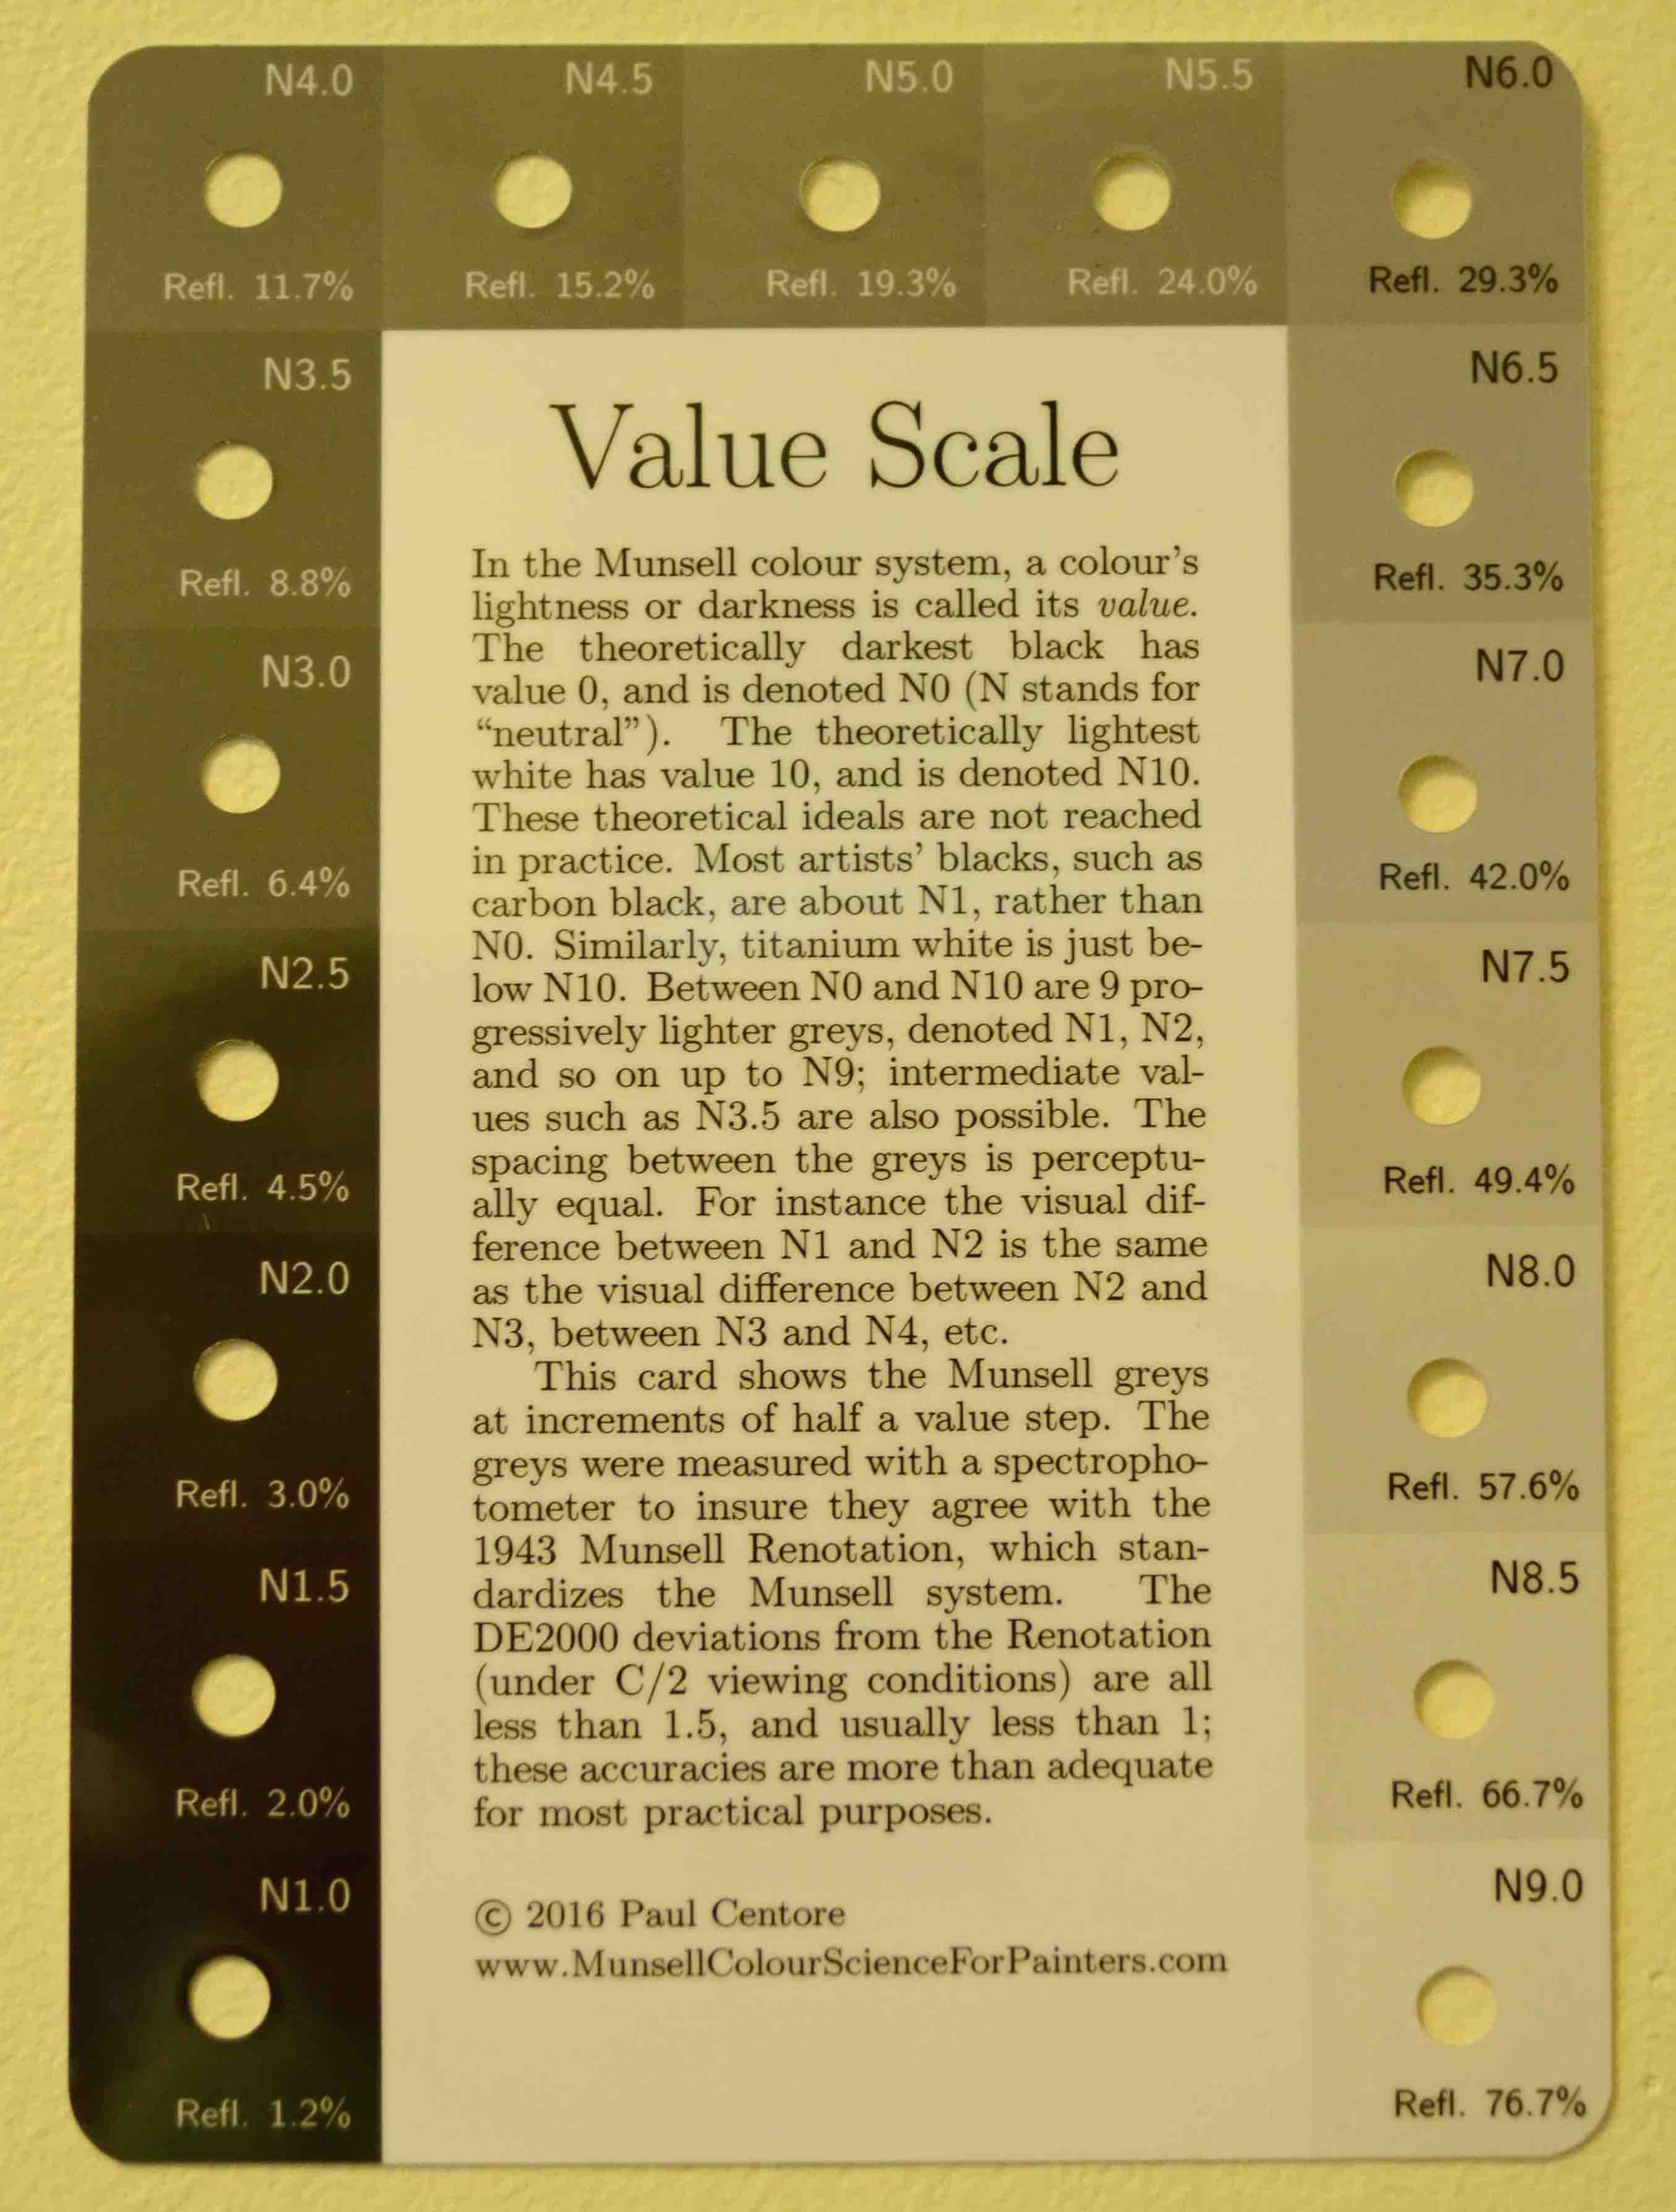 Value Scale